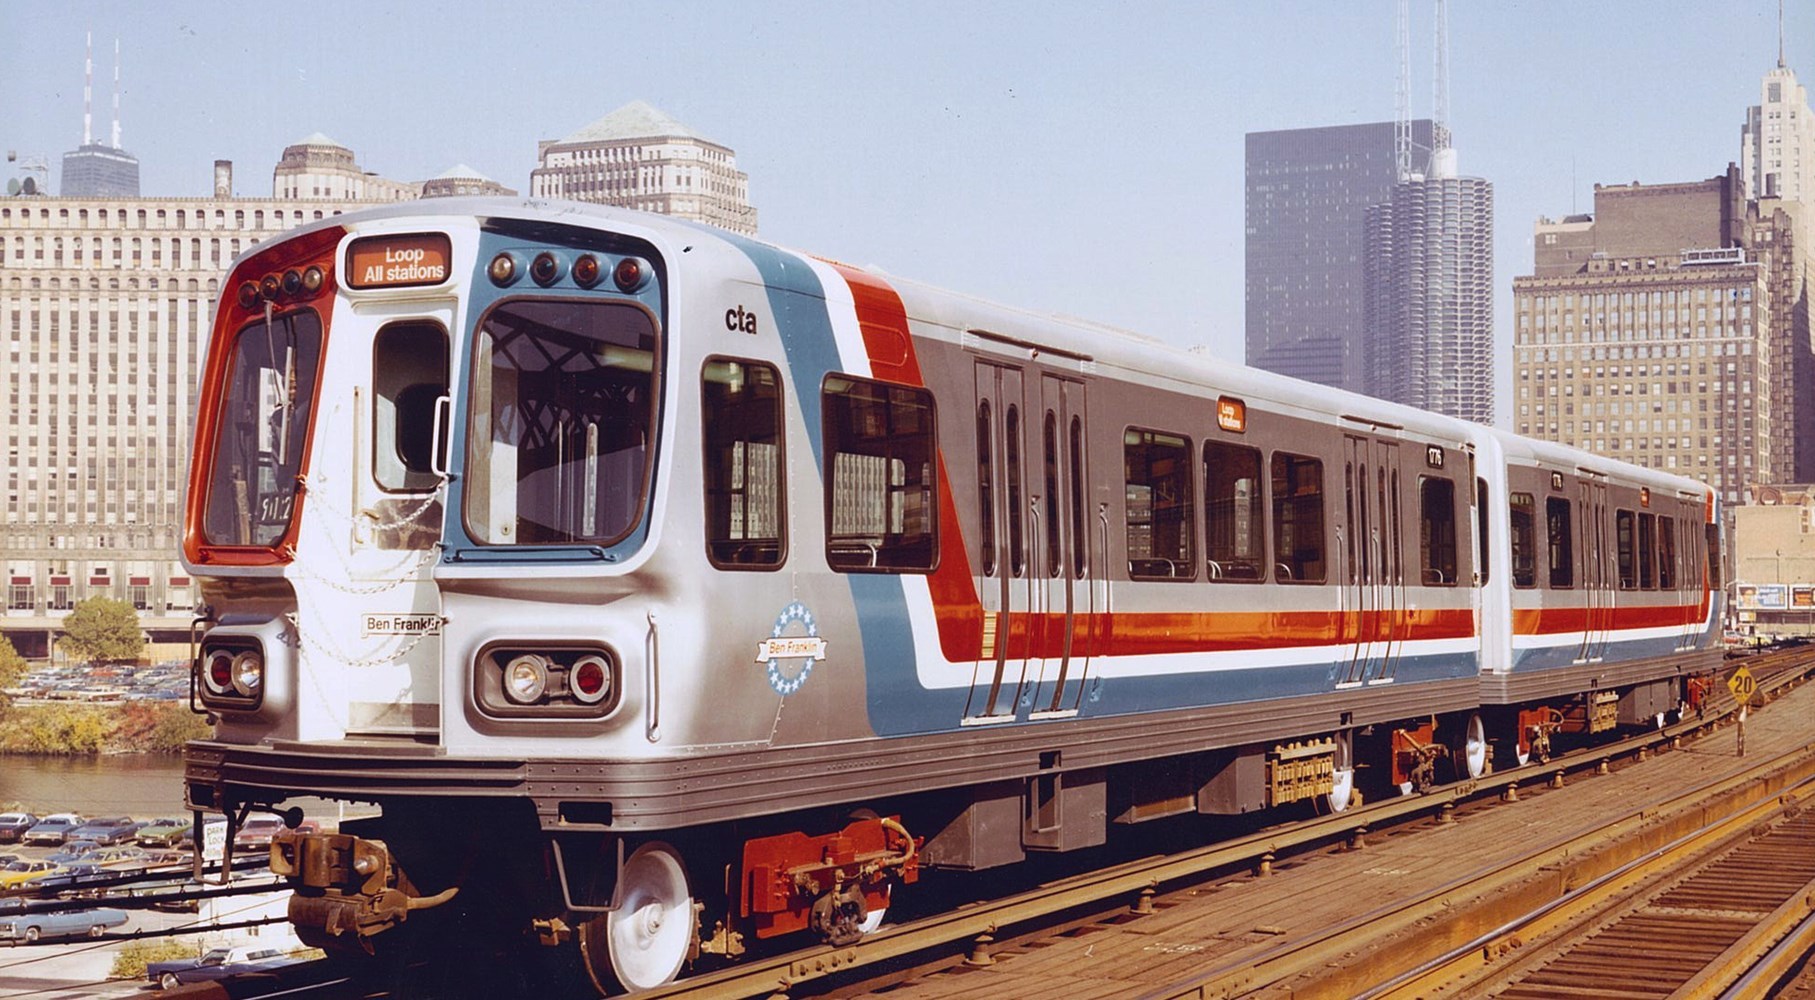 2000-series cars are seen on the Lake Street Bridge in front of the Merchandise Mart, Hancock tower and IBM building in bicentennial livery honoring Ben Franklin